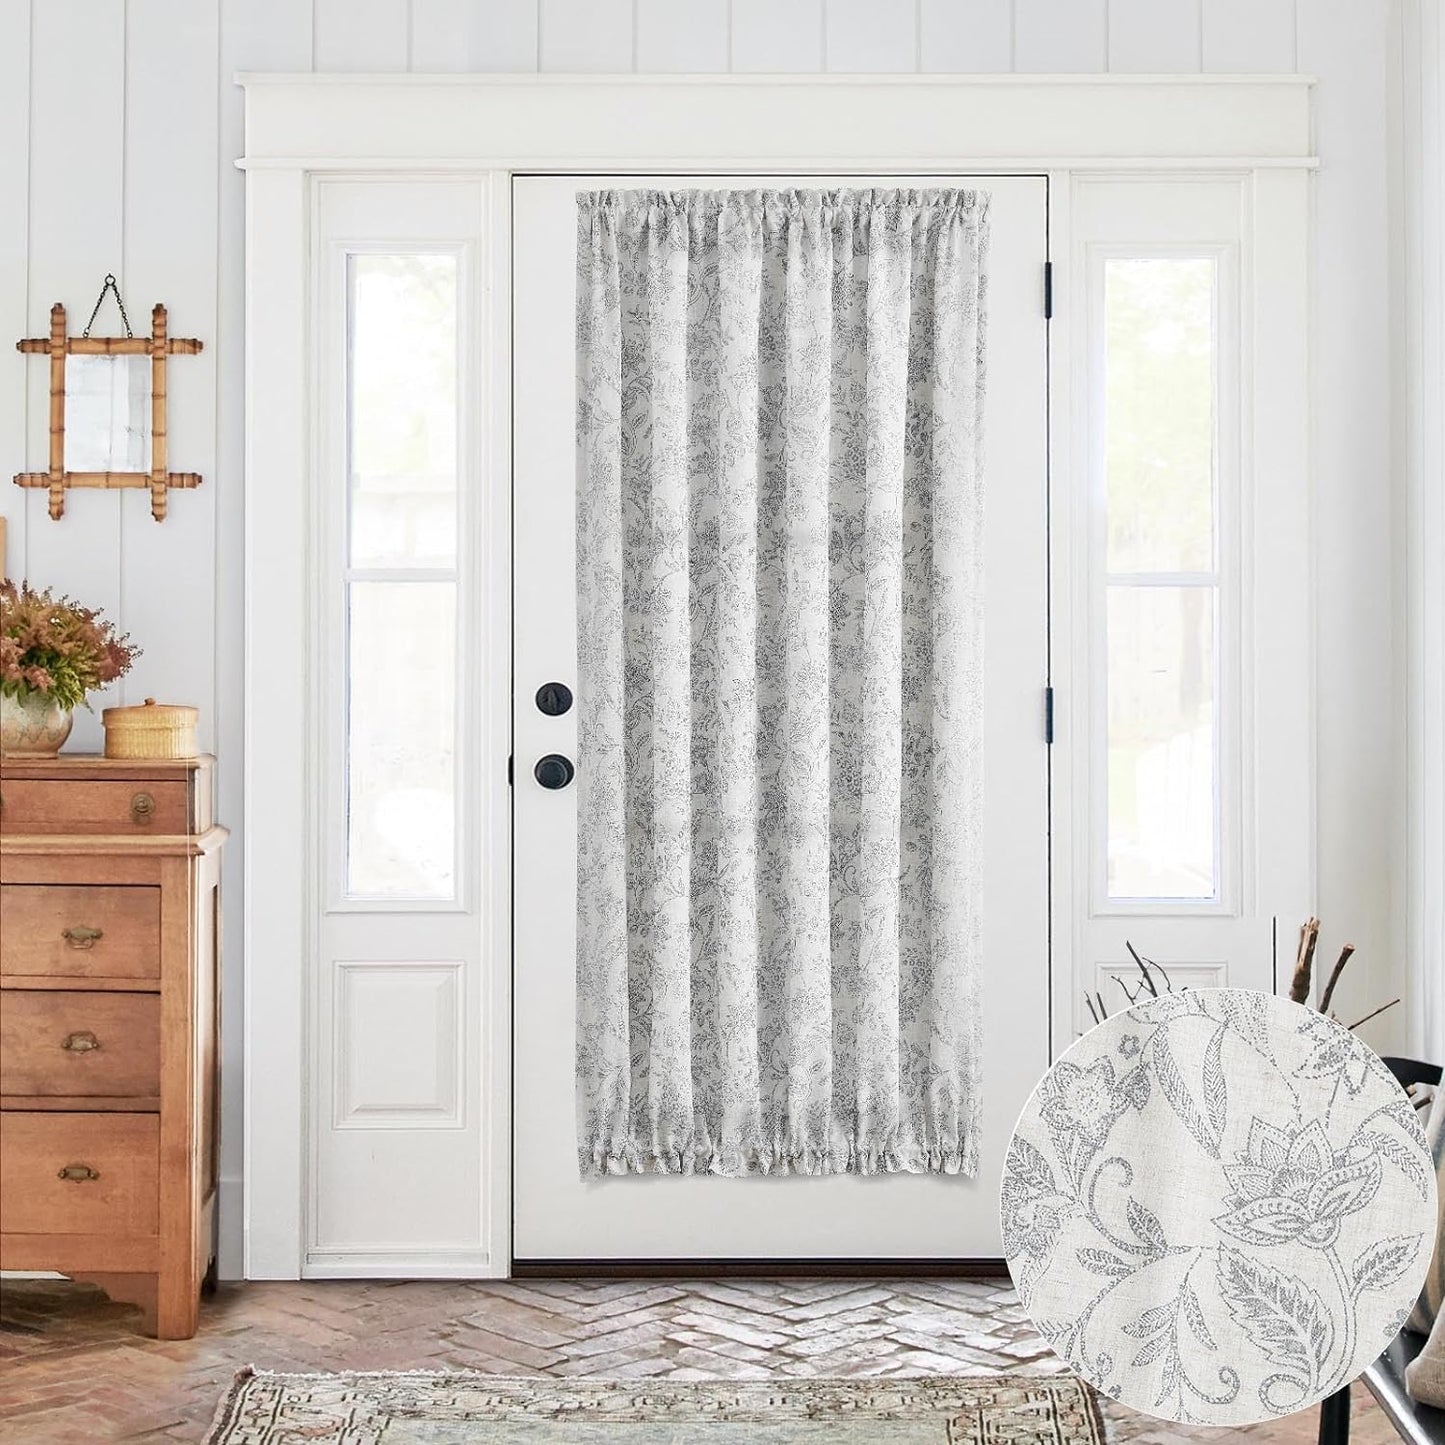 Jinchan French Door Curtain Farmhouse Floral Linen Curtain for Sliding Glass Door 72 Inches 1 Panel with Tieback Light Filtering Curtain for Door Window Patio Rod Pocket Yellow on Beige  CKNY HOME FASHION Forest Verbena Grey W50 X L72 